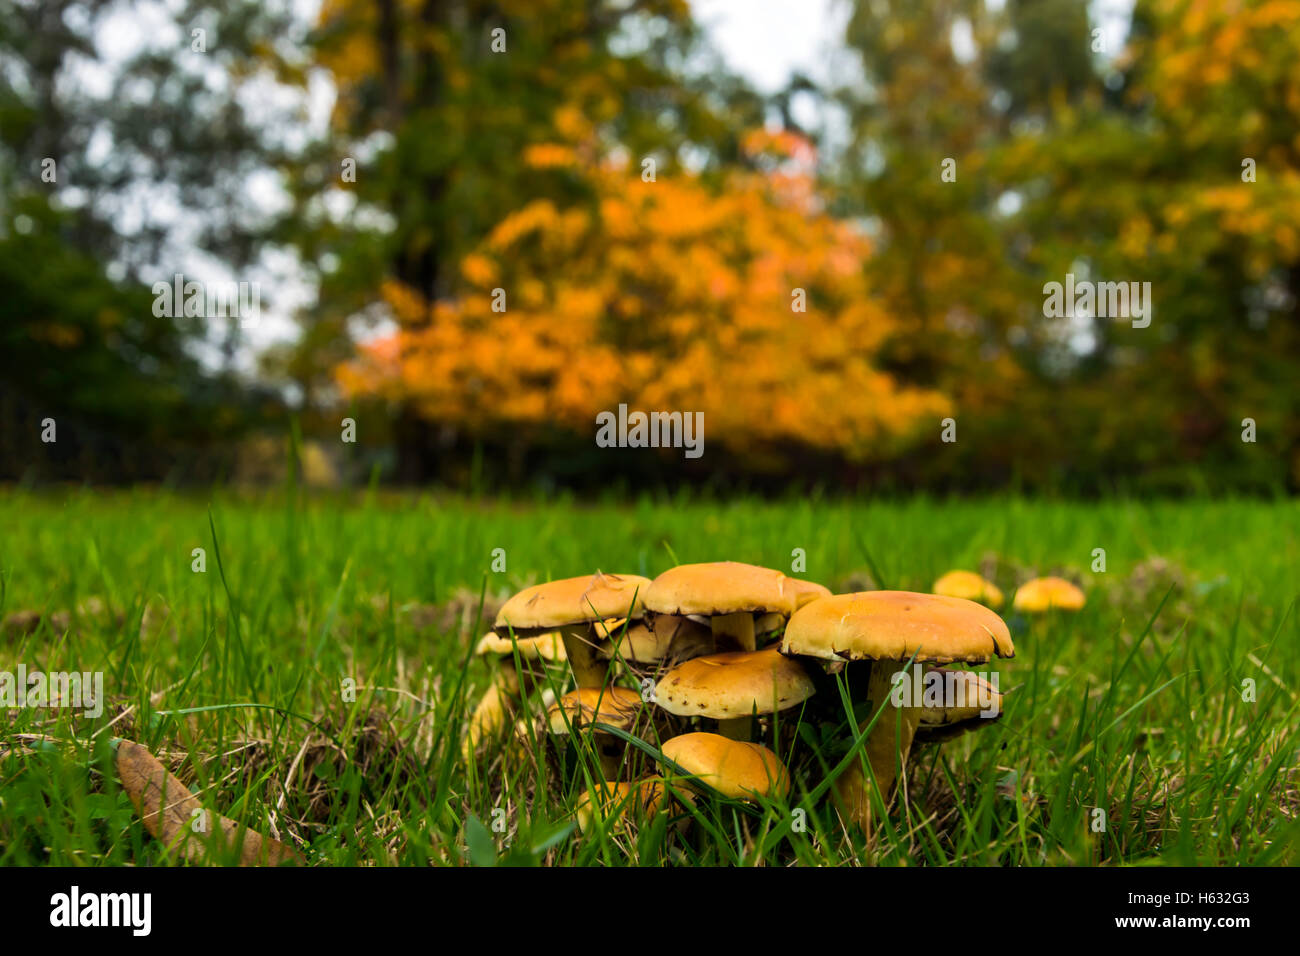 Group of many mushrooms surrounded by green fresh grass, in background many tones of yellow and orange appearing to define autum Stock Photo